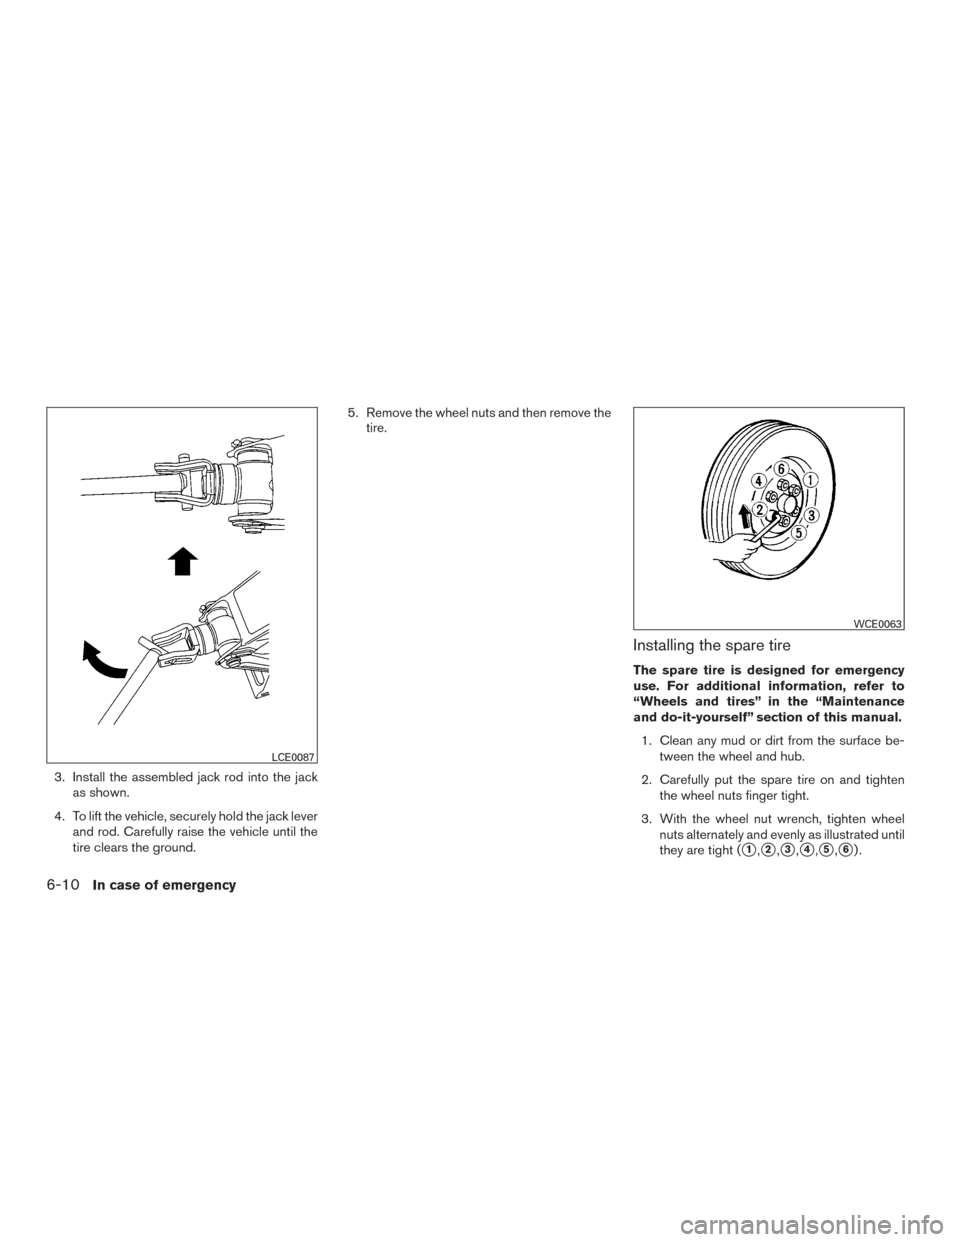 NISSAN FRONTIER 2015 D23 / 3.G User Guide 3. Install the assembled jack rod into the jackas shown.
4. To lift the vehicle, securely hold the jack lever and rod. Carefully raise the vehicle until the
tire clears the ground. 5. Remove the wheel